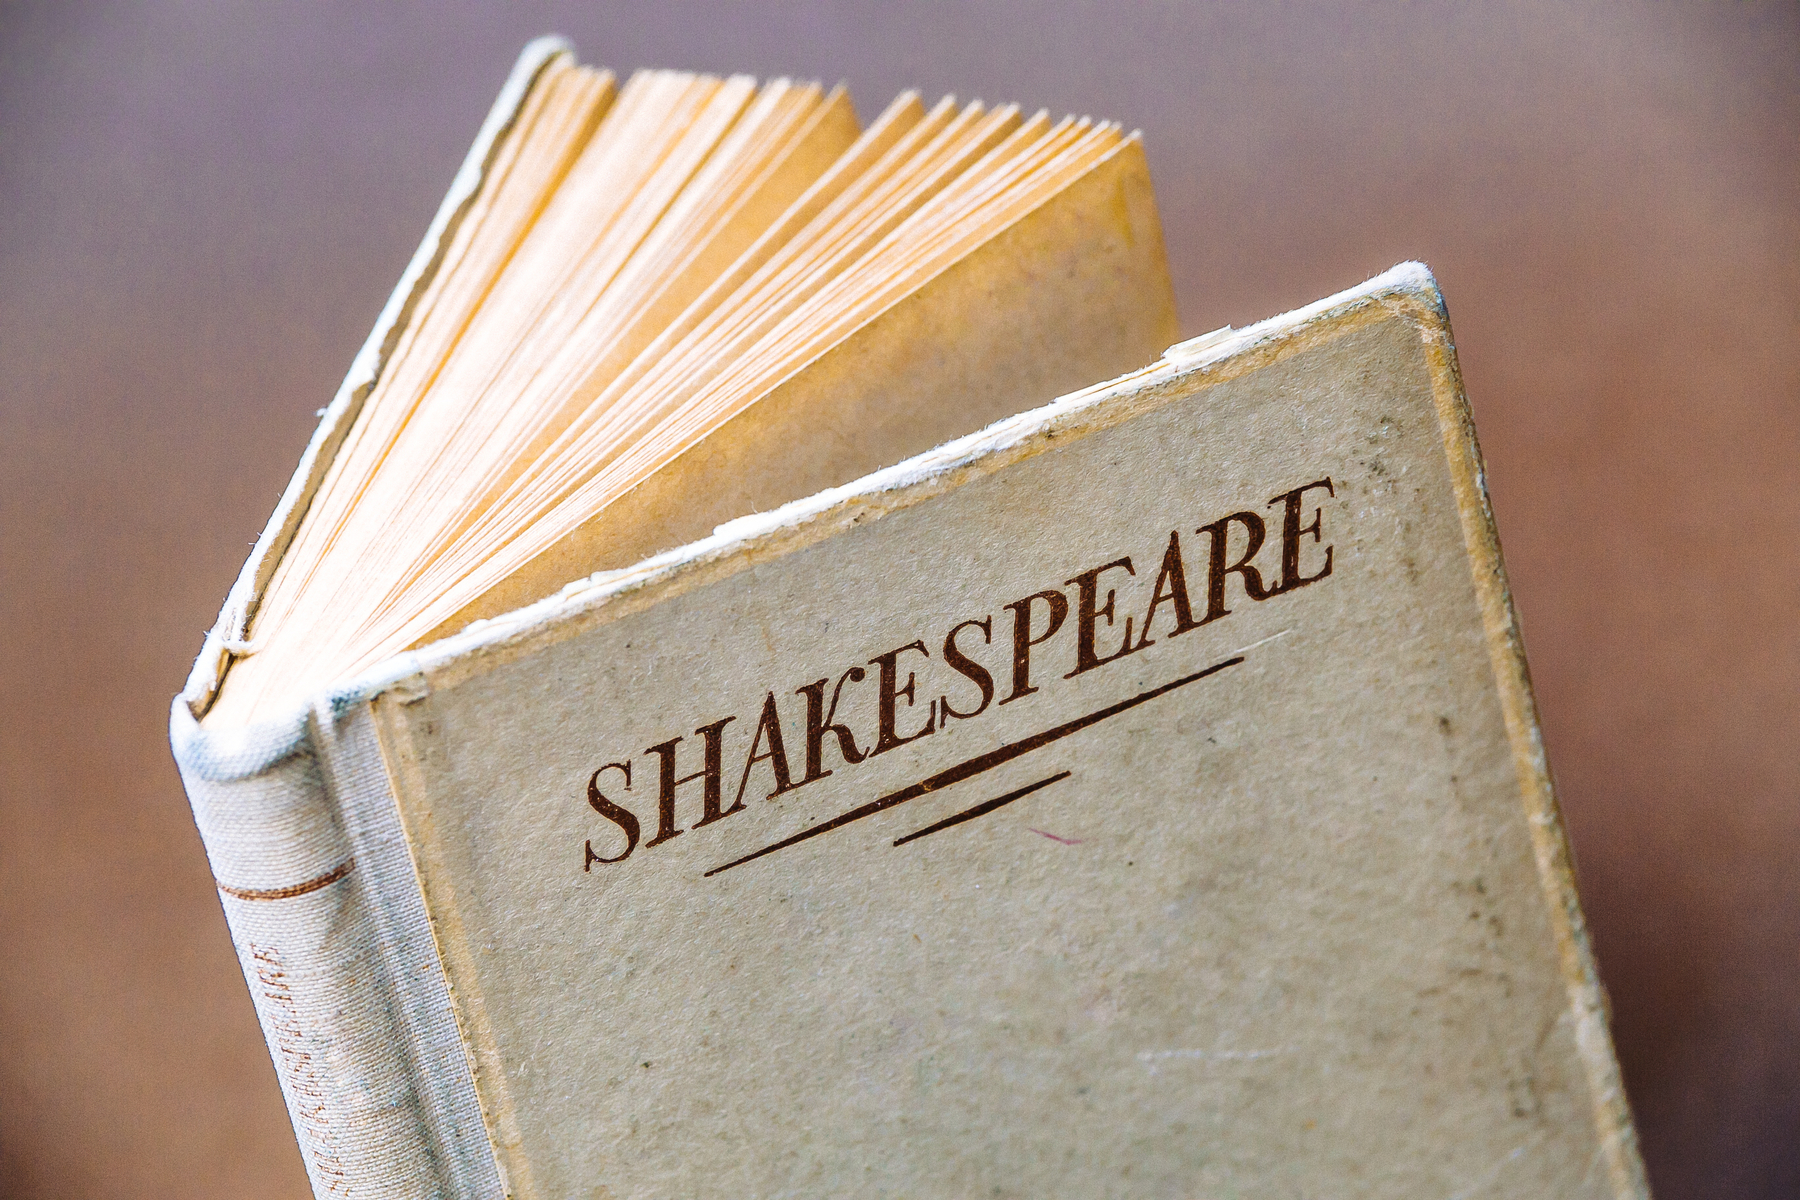 5 classic Shakespeare plays that offer valuable life lessons